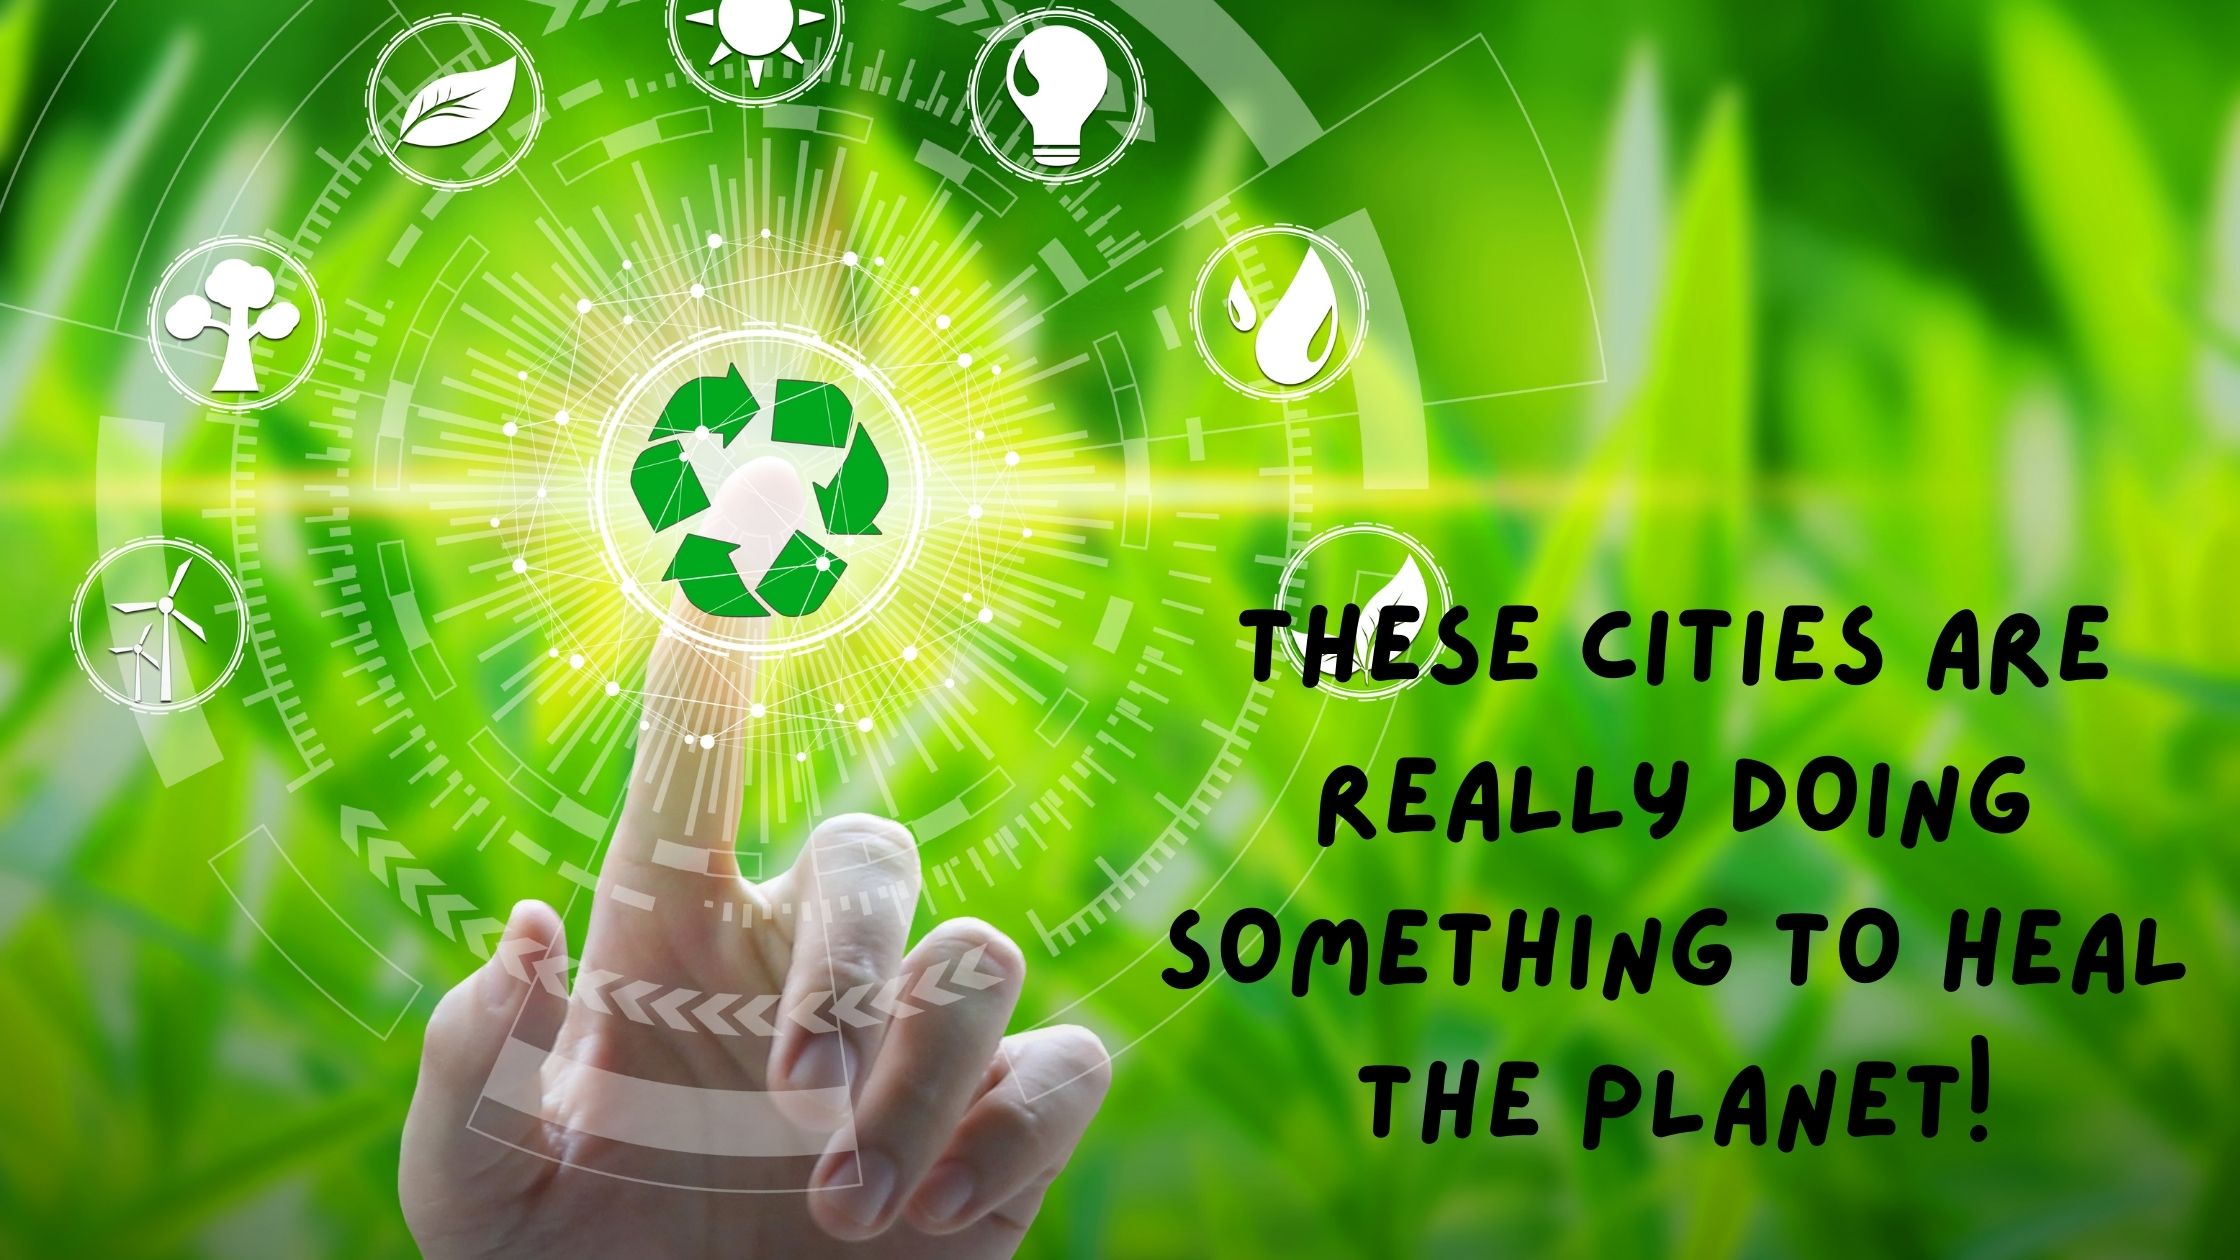 These cities are really doing something to heal the planet!